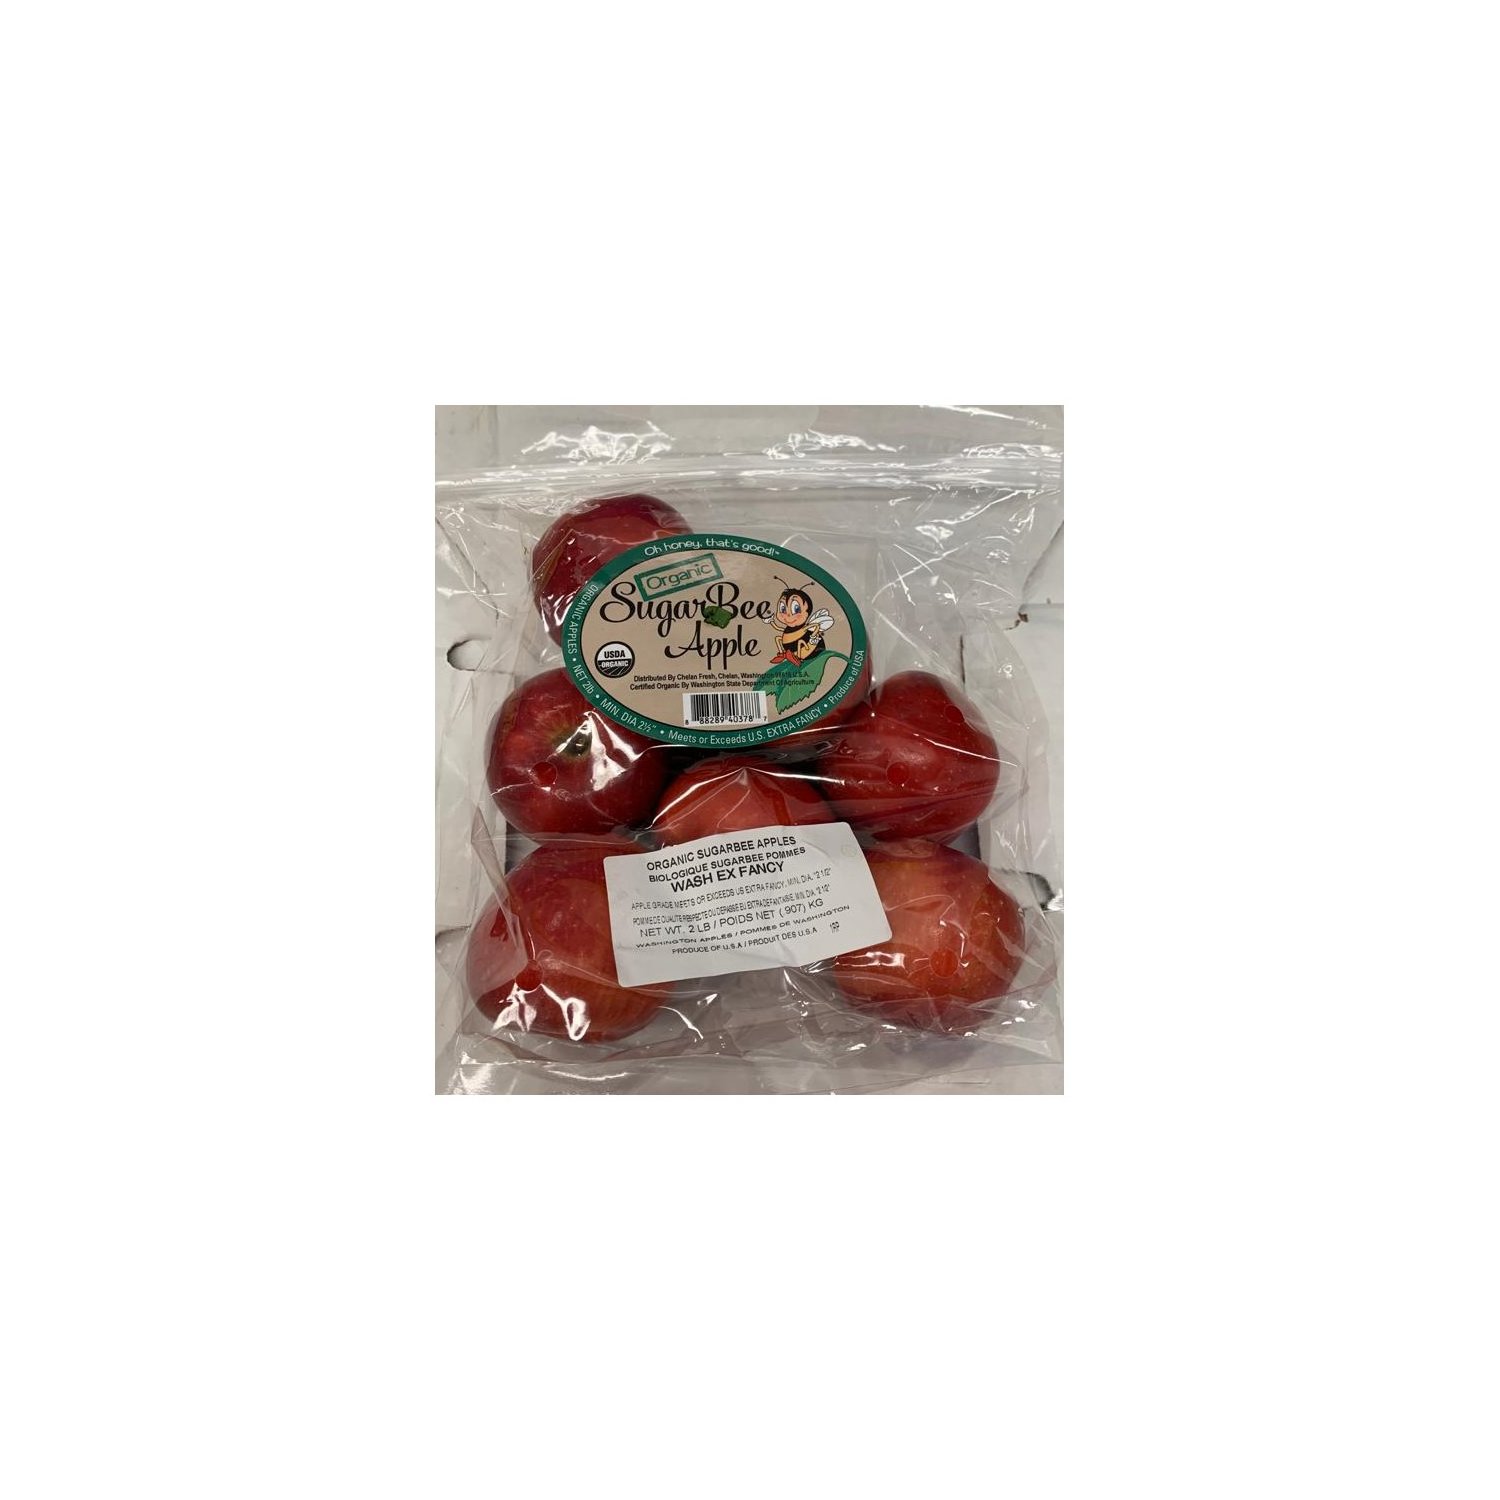 Piazza's Fine Foods - ORGANIC WASHINGTON Sugar Bee Apples Sugar Bee apples  are a great snack, a healthy option for lunch and make great desserts. Try  dicing up a Sugar Bee apple